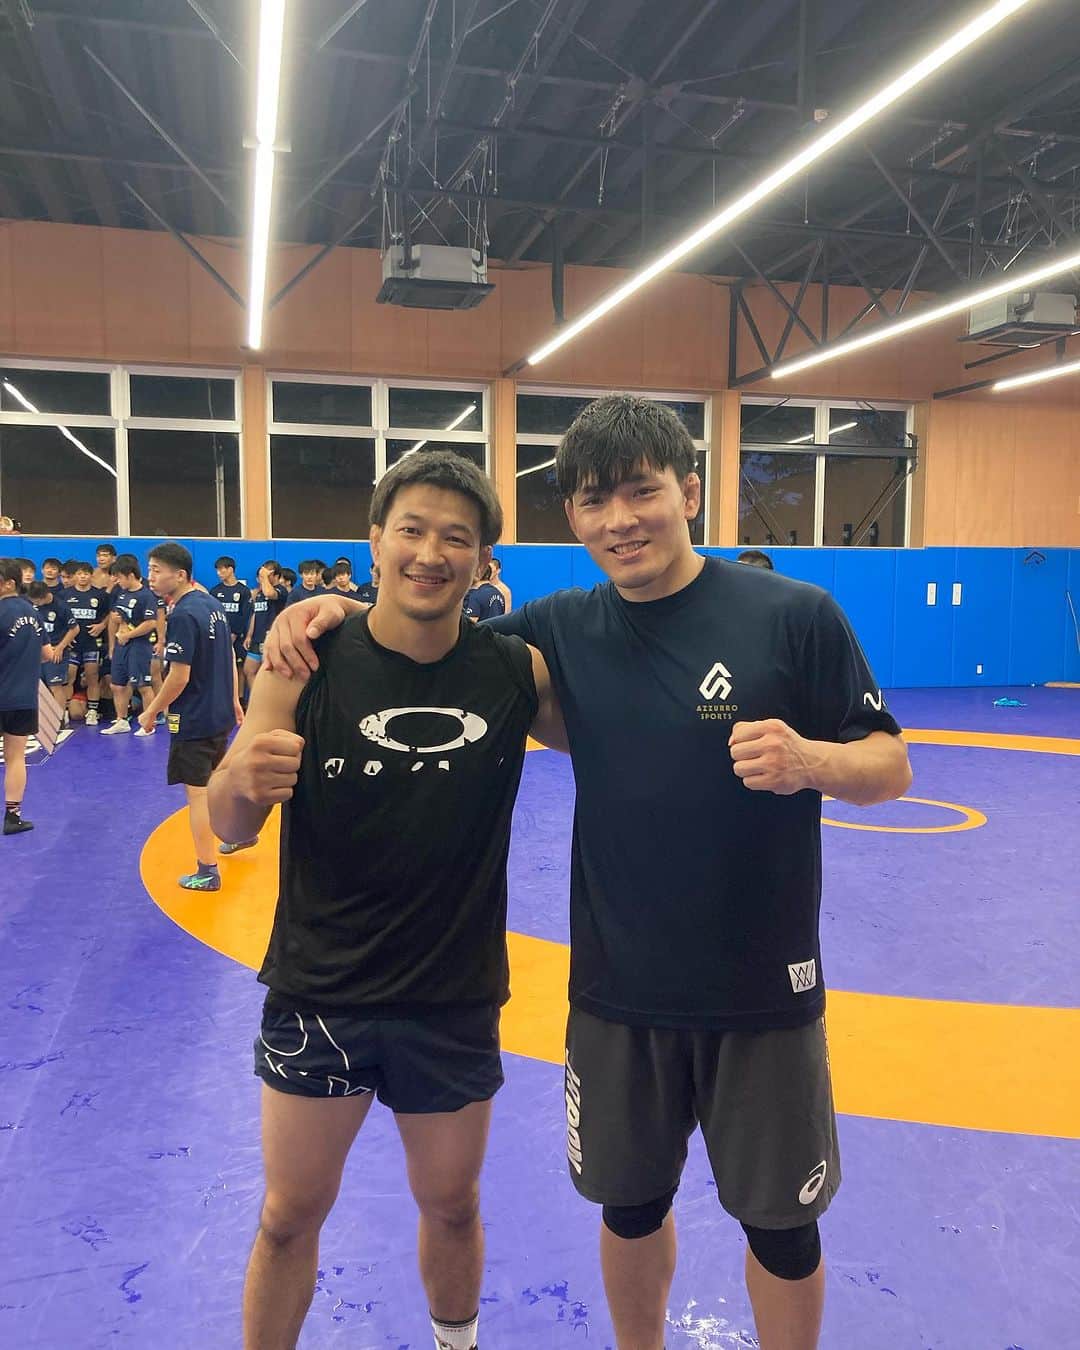 高谷惣亮のインスタグラム：「The other day, I took Takudai wrestlers to Ikuei University for a training session.  Ryutaro Matsumoto is a famous athlete who won a bronze medal in the 60kg Greco weight class at the London Olympics. I competed with him in London, and I still remember how impressed I was.  I asked Ryutaro for his help, and he graciously accepted my request. Thank you very much.  As for practice, many of the players who lead the university Greco team, including Harada, who recently became a member of the World Championships team, practiced very hard. It was a great inspiration for our Takushoku members.  I am originally a freestyle player, but I would like to learn both freestyle and greco in order to strengthen both. I would like to thank Ryutaro, Yanagawa Sensei, and Coach Ueno for their detailed guidance this time. I look forward to working with you again.  先日、拓大の選手を連れて育英大学の方へ出稽古へ行ってきました。  隆太郎先生はロンドン五輪でグレコ60kg級で銅メダルを獲得した名選手です。私も一緒にロンドンで戦ってきましたがその感動は今でも覚えています。  その隆太郎先生にお願いしたところ、快く受け入れていただきました。ありがとうございます。  練習に関しても、先日世界選手権代表となった原田選手を含め大学のグレコを引っ張る選手が多いのでとてもハードな練習をこなしていました。 うちの選手達にもとても良い刺激になりました。  私自身は元々フリーの選手ですが、指導に関して、フリーもグレコも学んで両方強くしていきたいと思っています。今回細かい指導もしてくださった隆太郎先生はじめ柳川先生、上野コーチ、ありがとうございました。 またよろしくお願いします。」